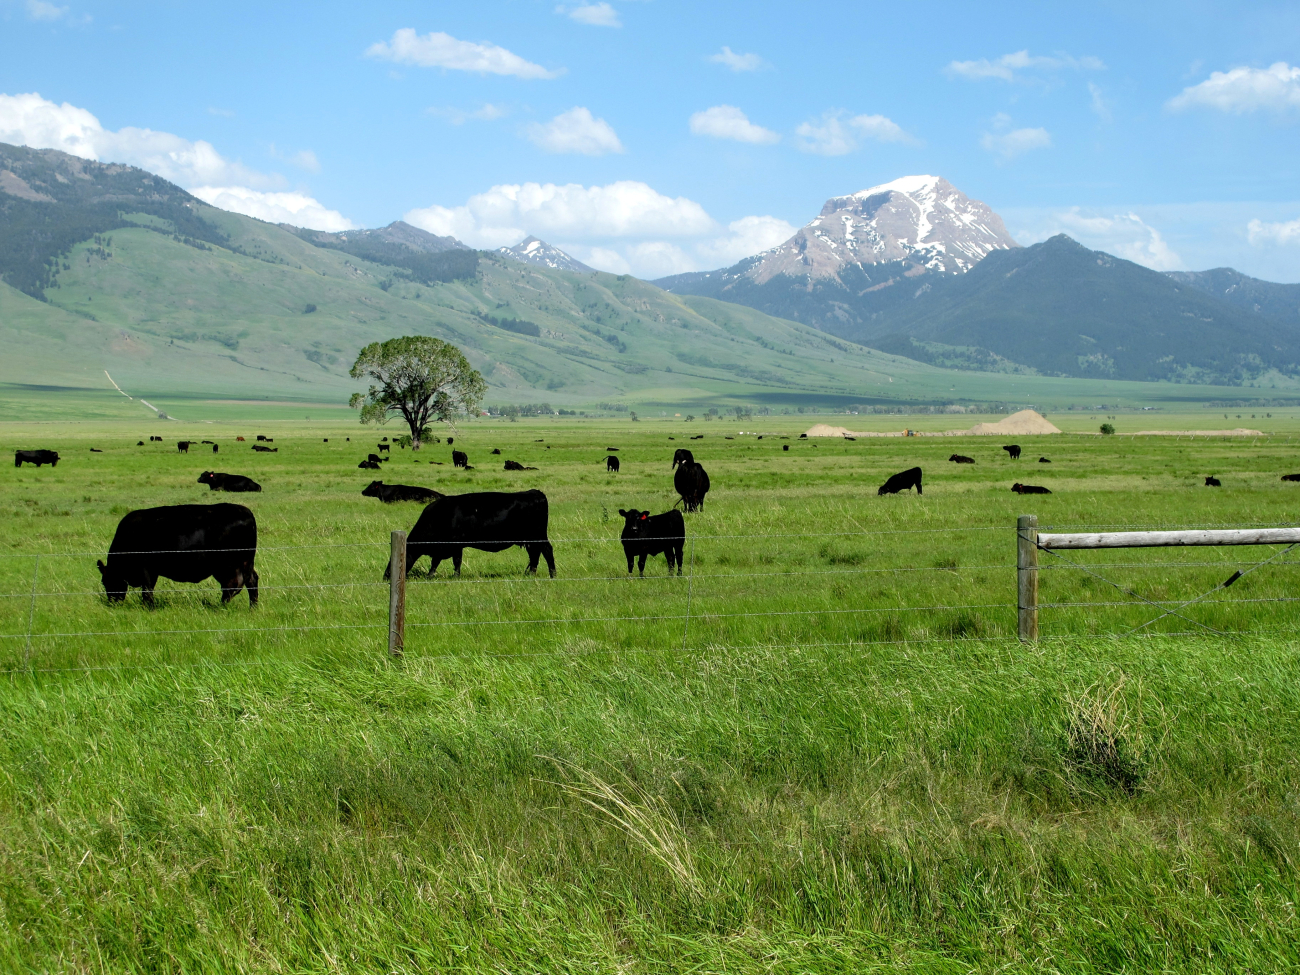 A cattle ranch in the Madison River Valley accentuated by a striking mountainpeak